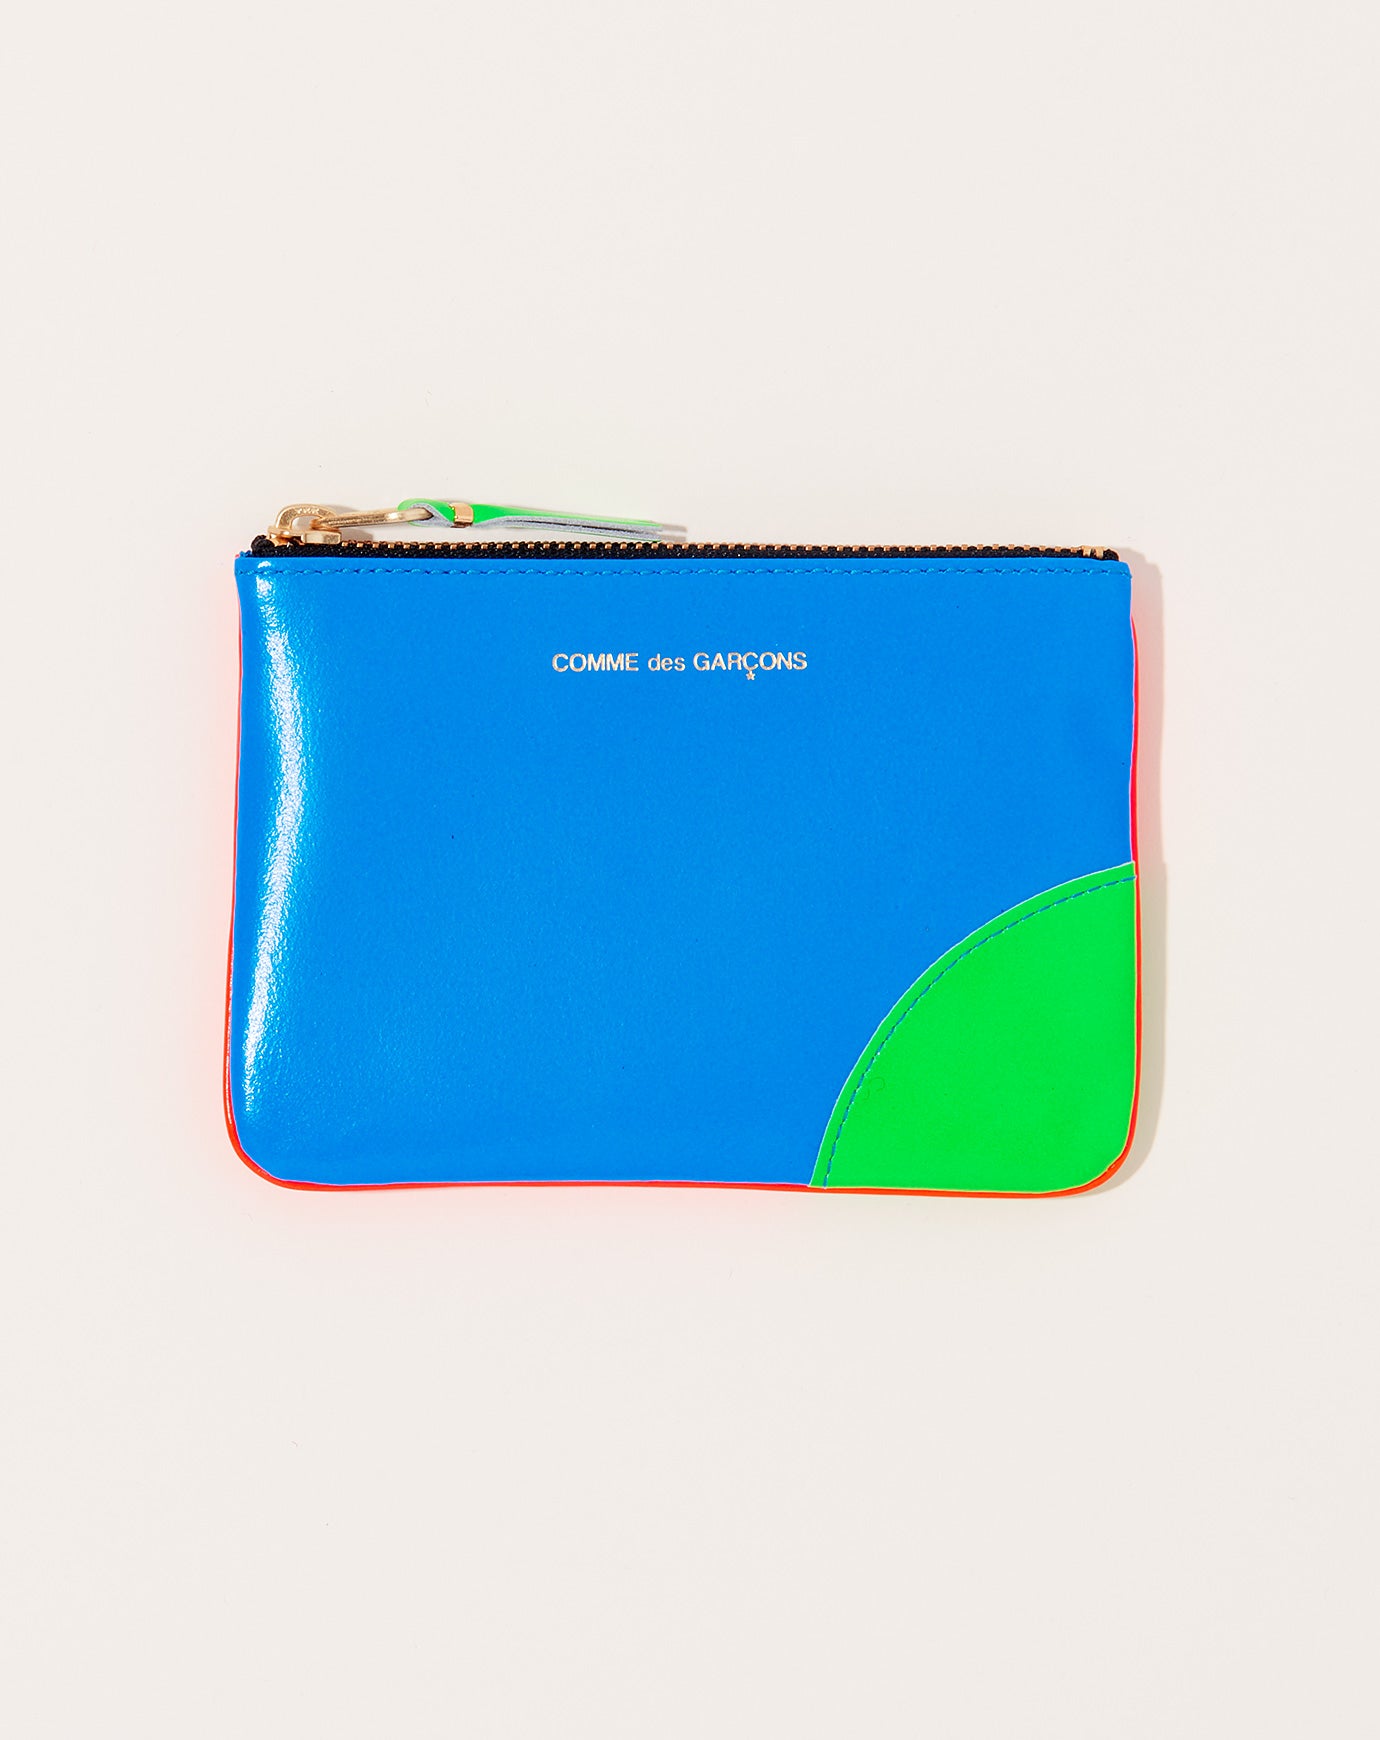 Super Fluo Pouch in Blue and Orange